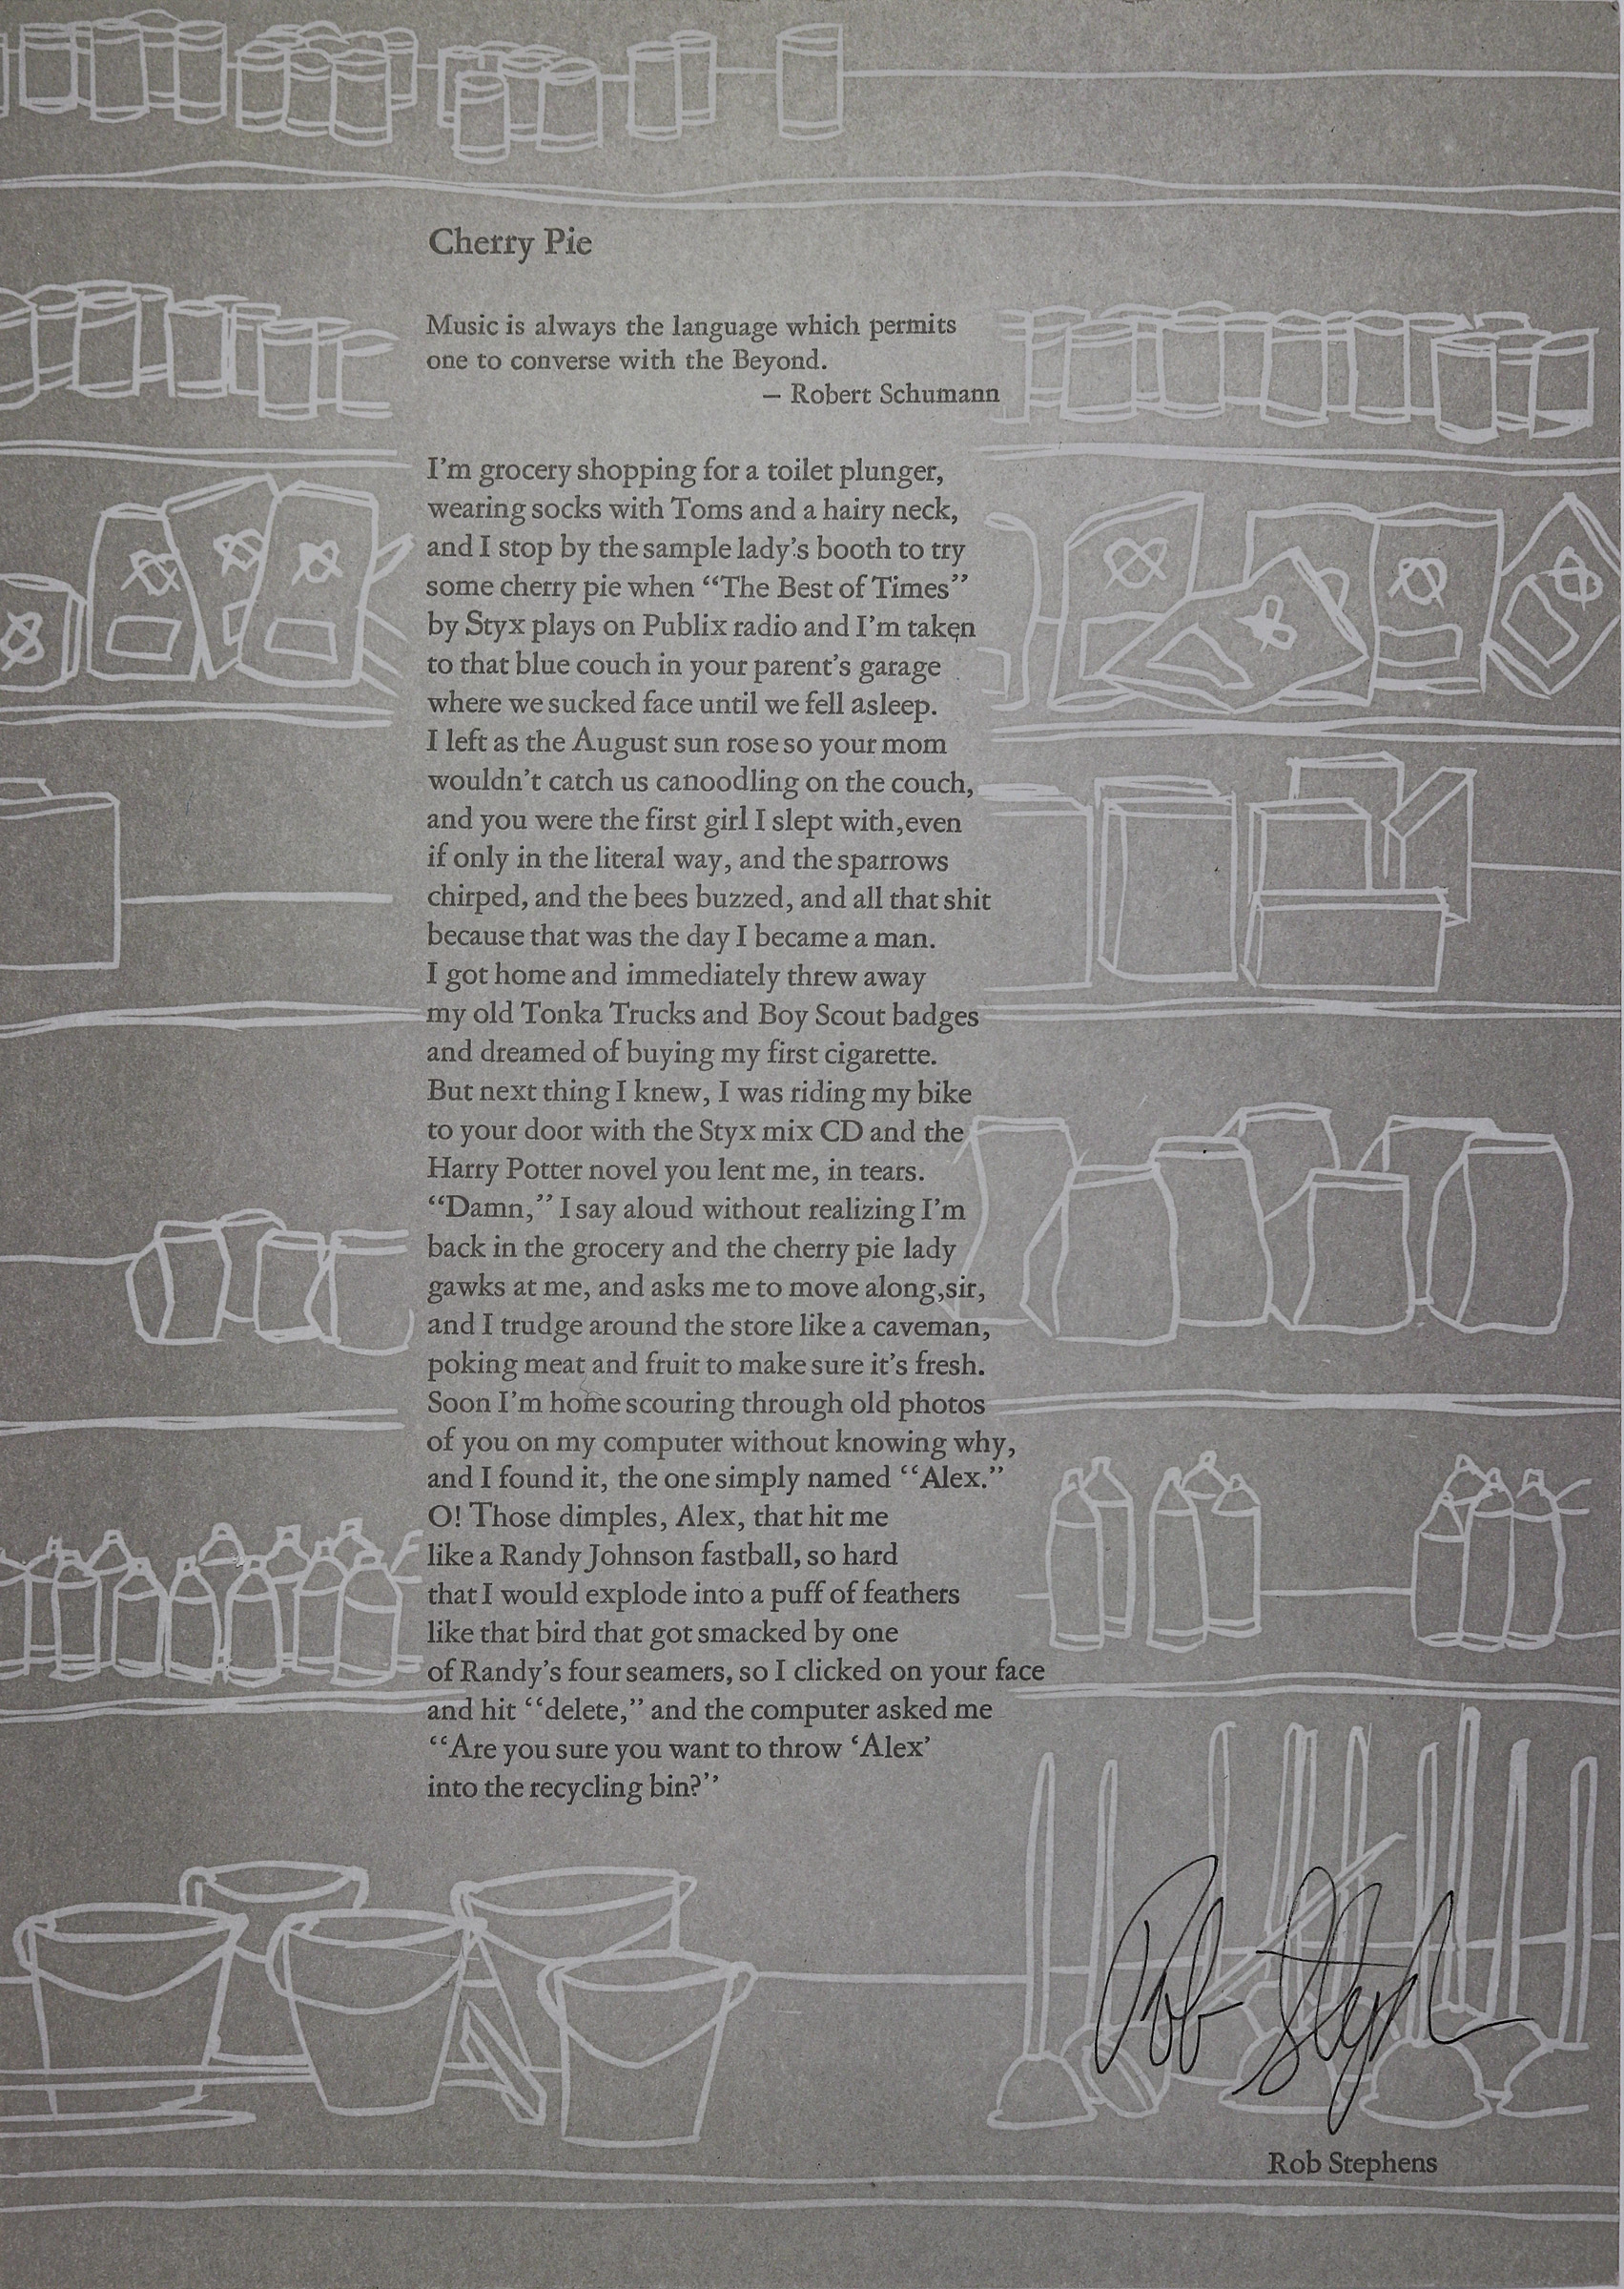 Rectangular in shape and vertical in length, this large broadside consists of a light gray background with white designs that resembles shelves of products in a market like cans, bottles, buckets and plungers, going from top to bottom of the broadside. Text is set in a solid black color and centered in the middle as a large paragraph, also going from top to bottom. The title is set at the very top above the text in the same color, font size and design. Right below the title is a quote by Robert Schumann before the text begins. Signed by the author.